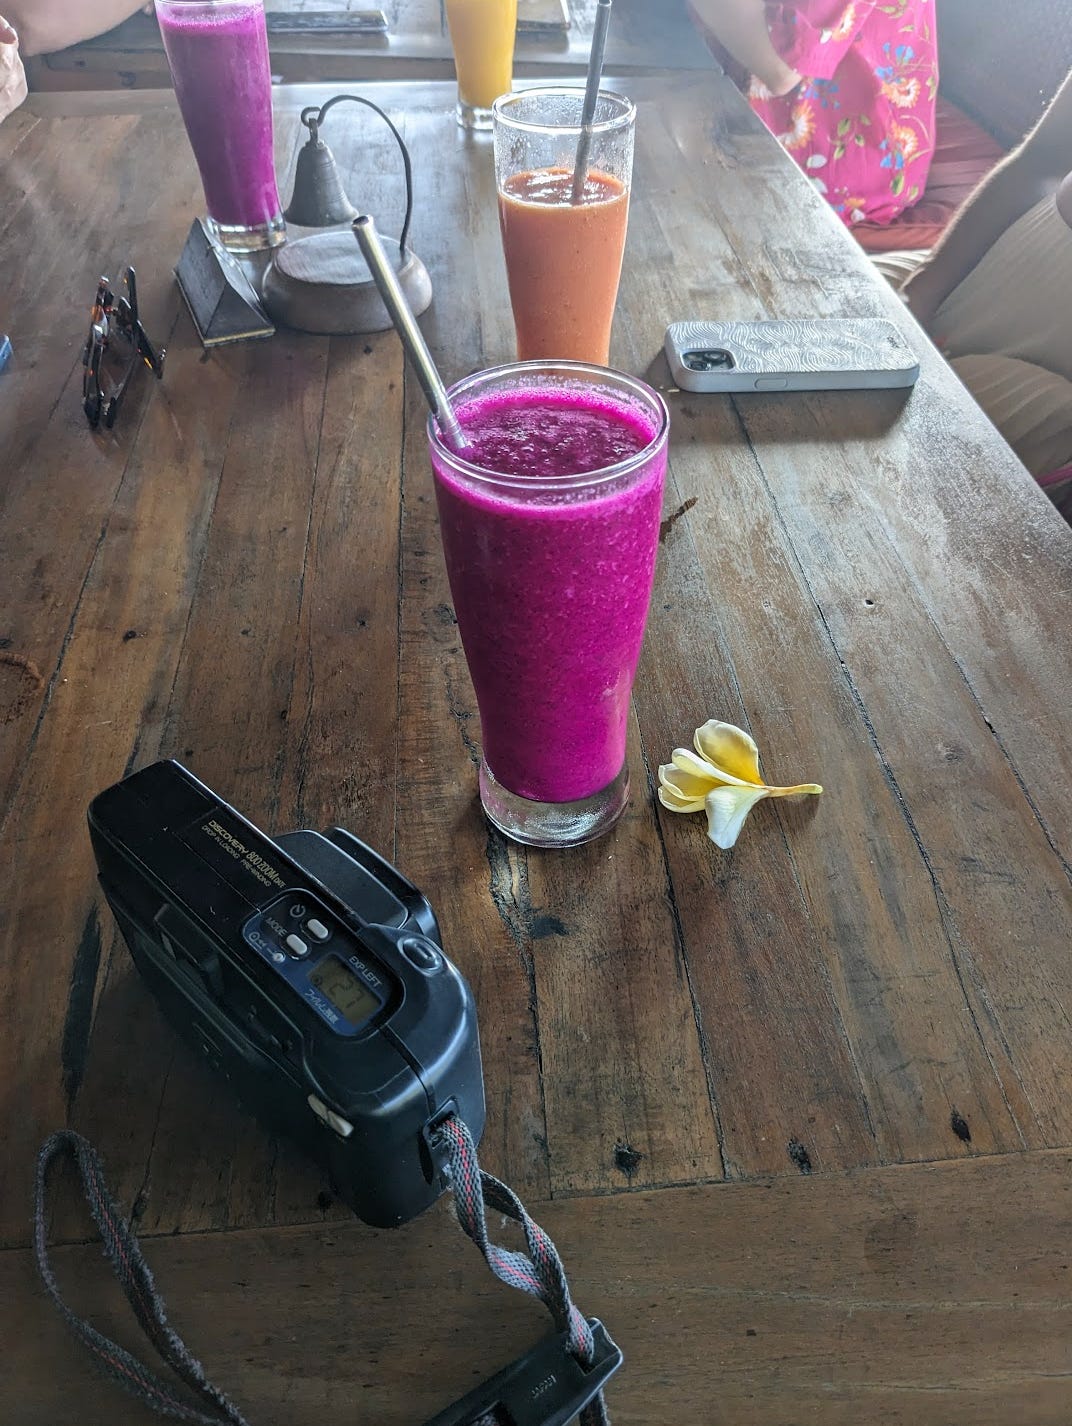 a bright purple / fuscia drink lies next to a white and yellow flower and black point and shoot camera on a wooden table